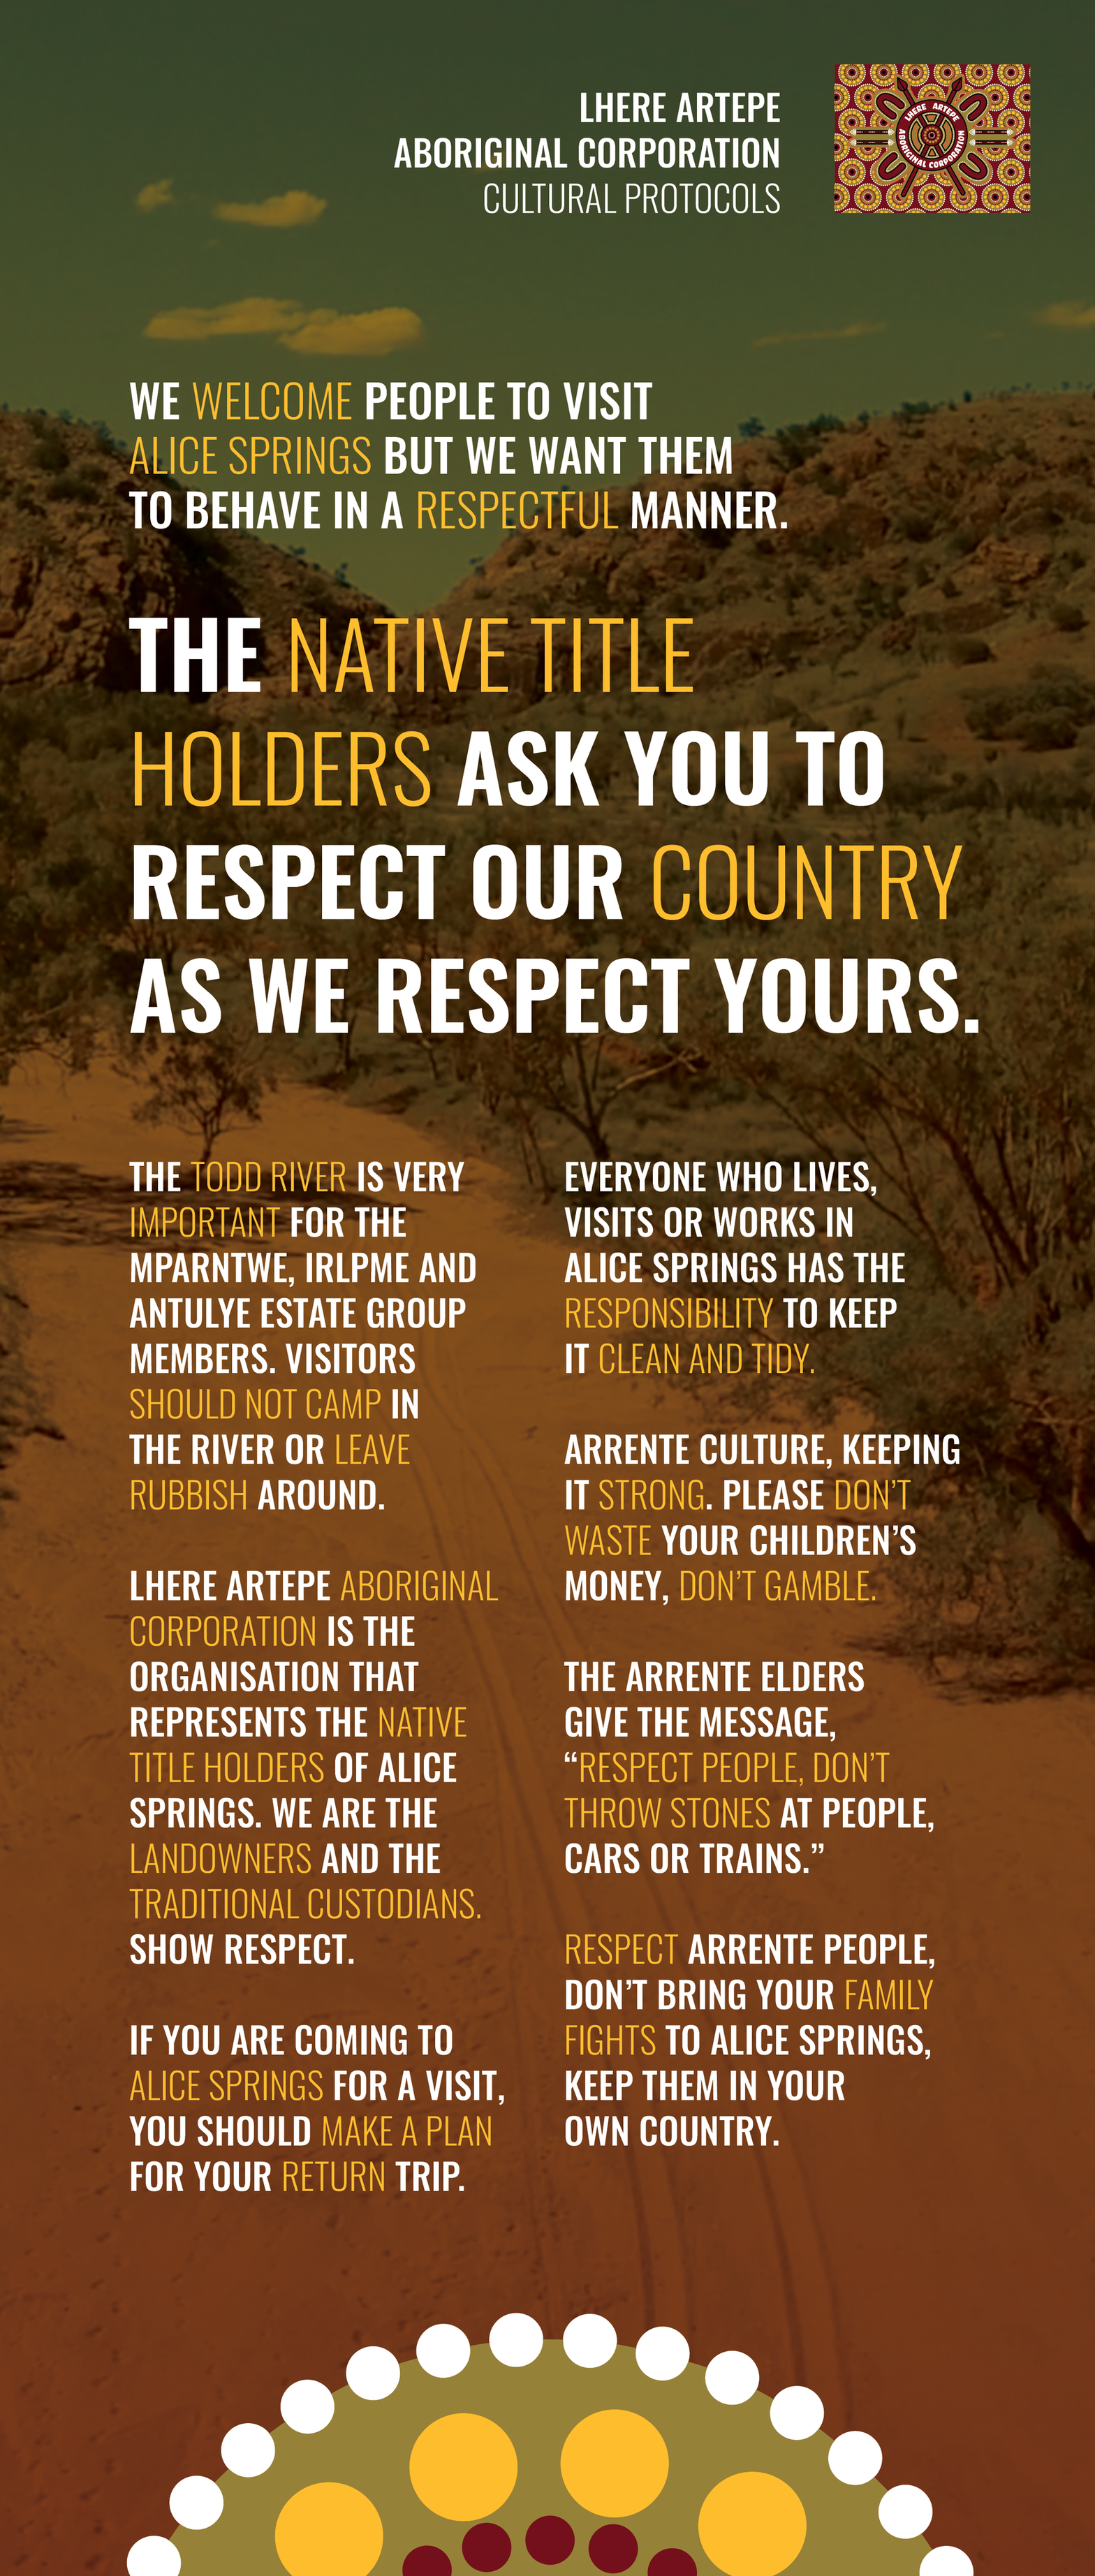 The native title holders ask you to respect our country as we respect yours.